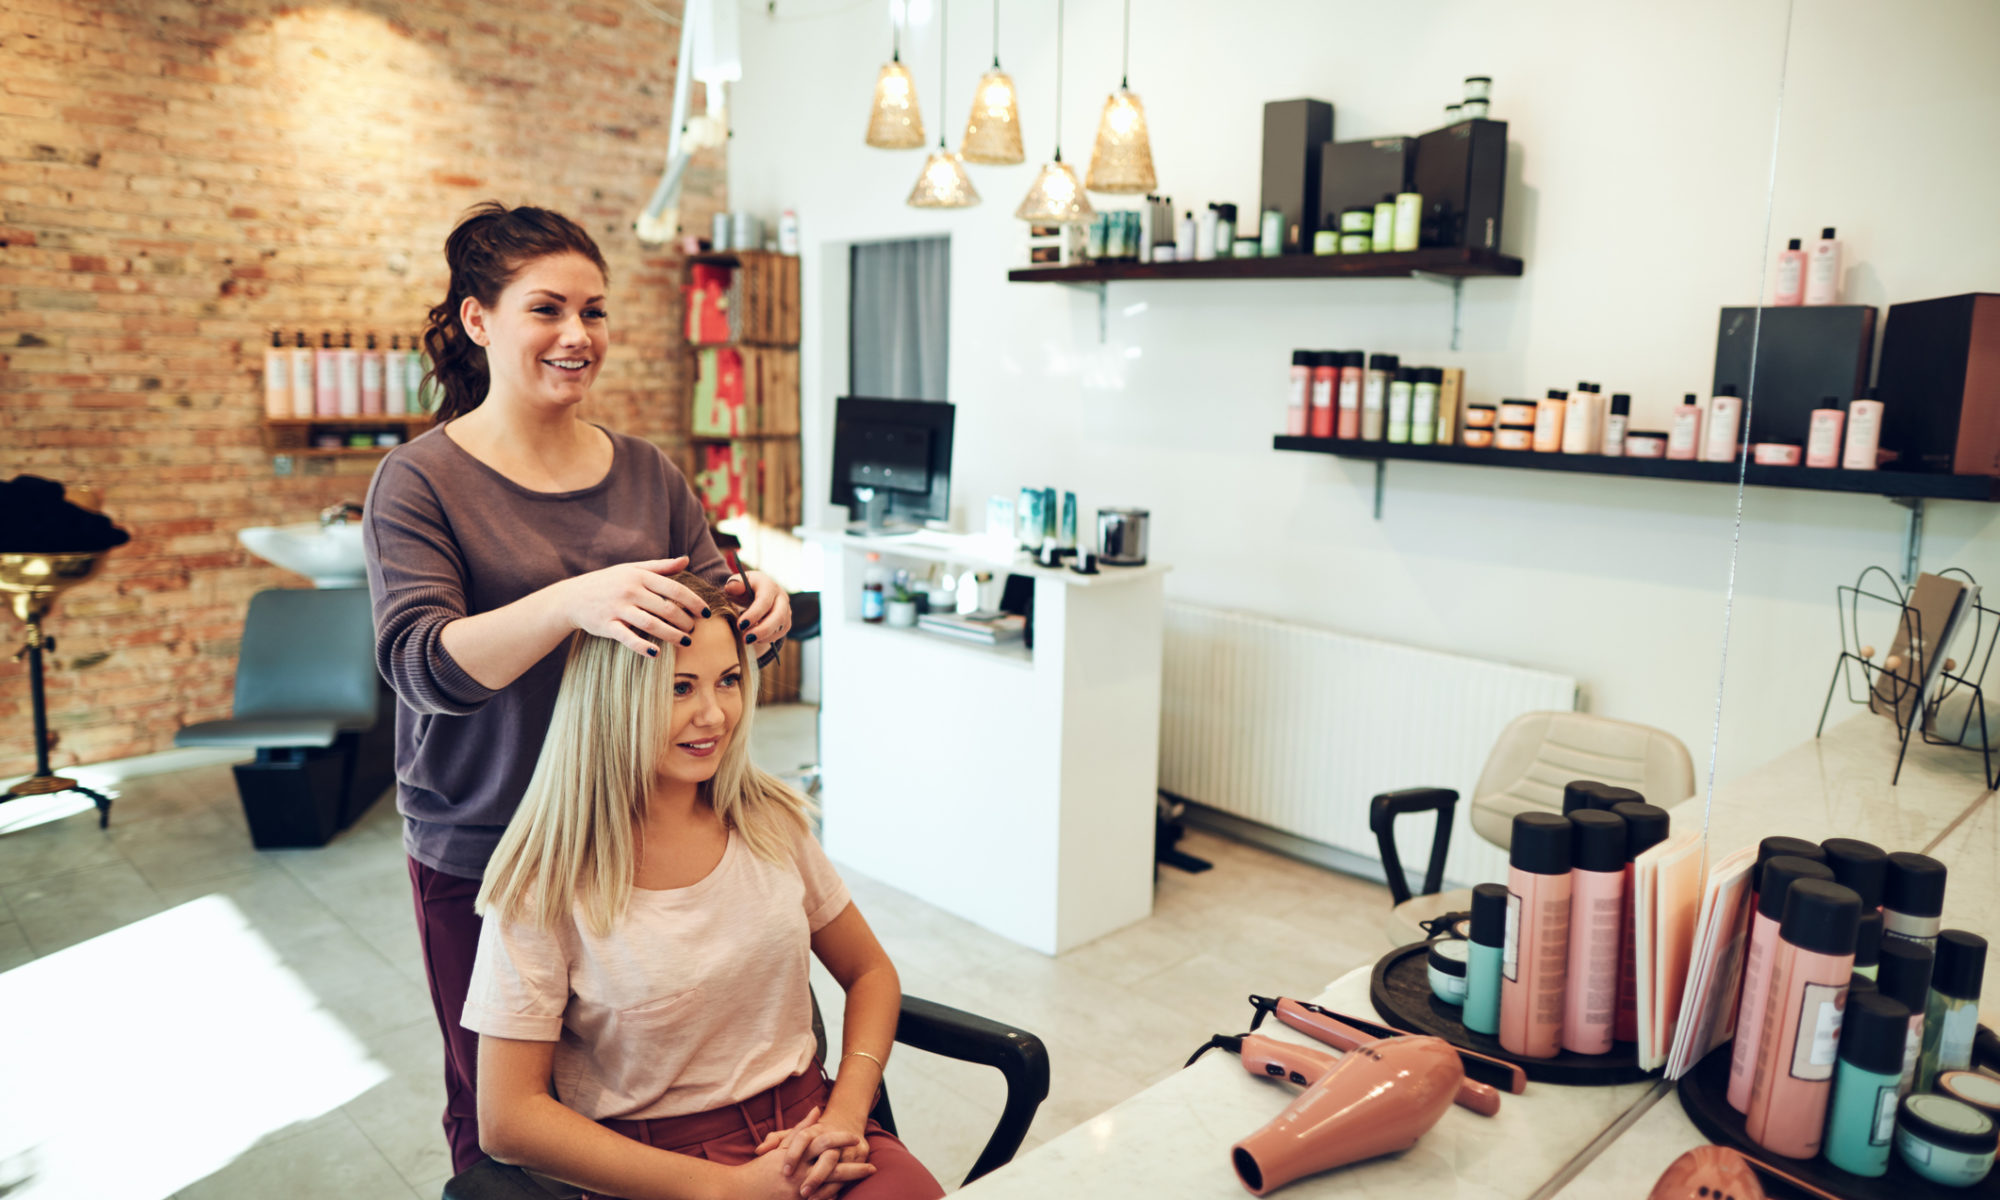 Young blonde woman smiling and looking at her reflection in a mirror while sitting in a salon chair discussing the costs of a new salon website